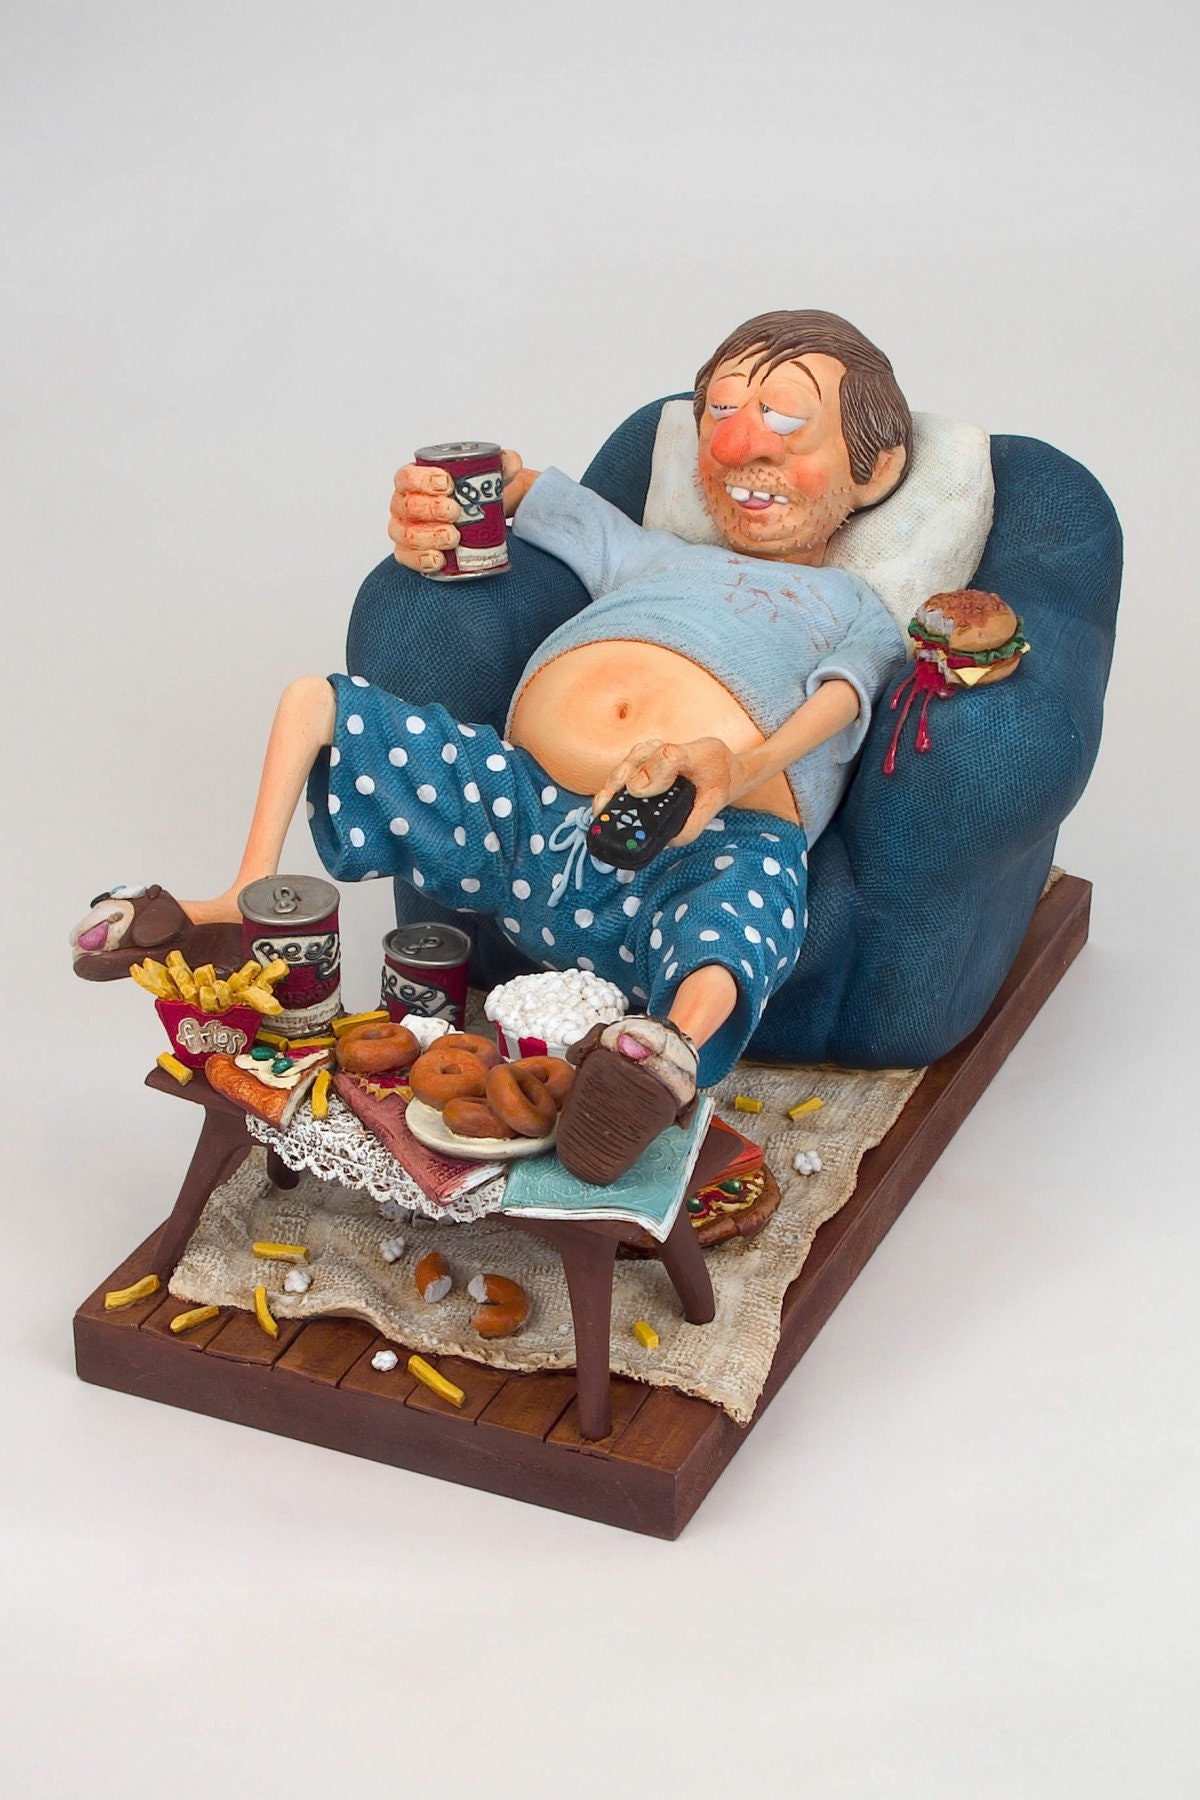 The Couch Potato Figurine, Hand-painted, TV & Movie Lovers' Art, Unique  Humorous Decor, Perfect Gift, Relaxing Scene, Collectible - Etsy